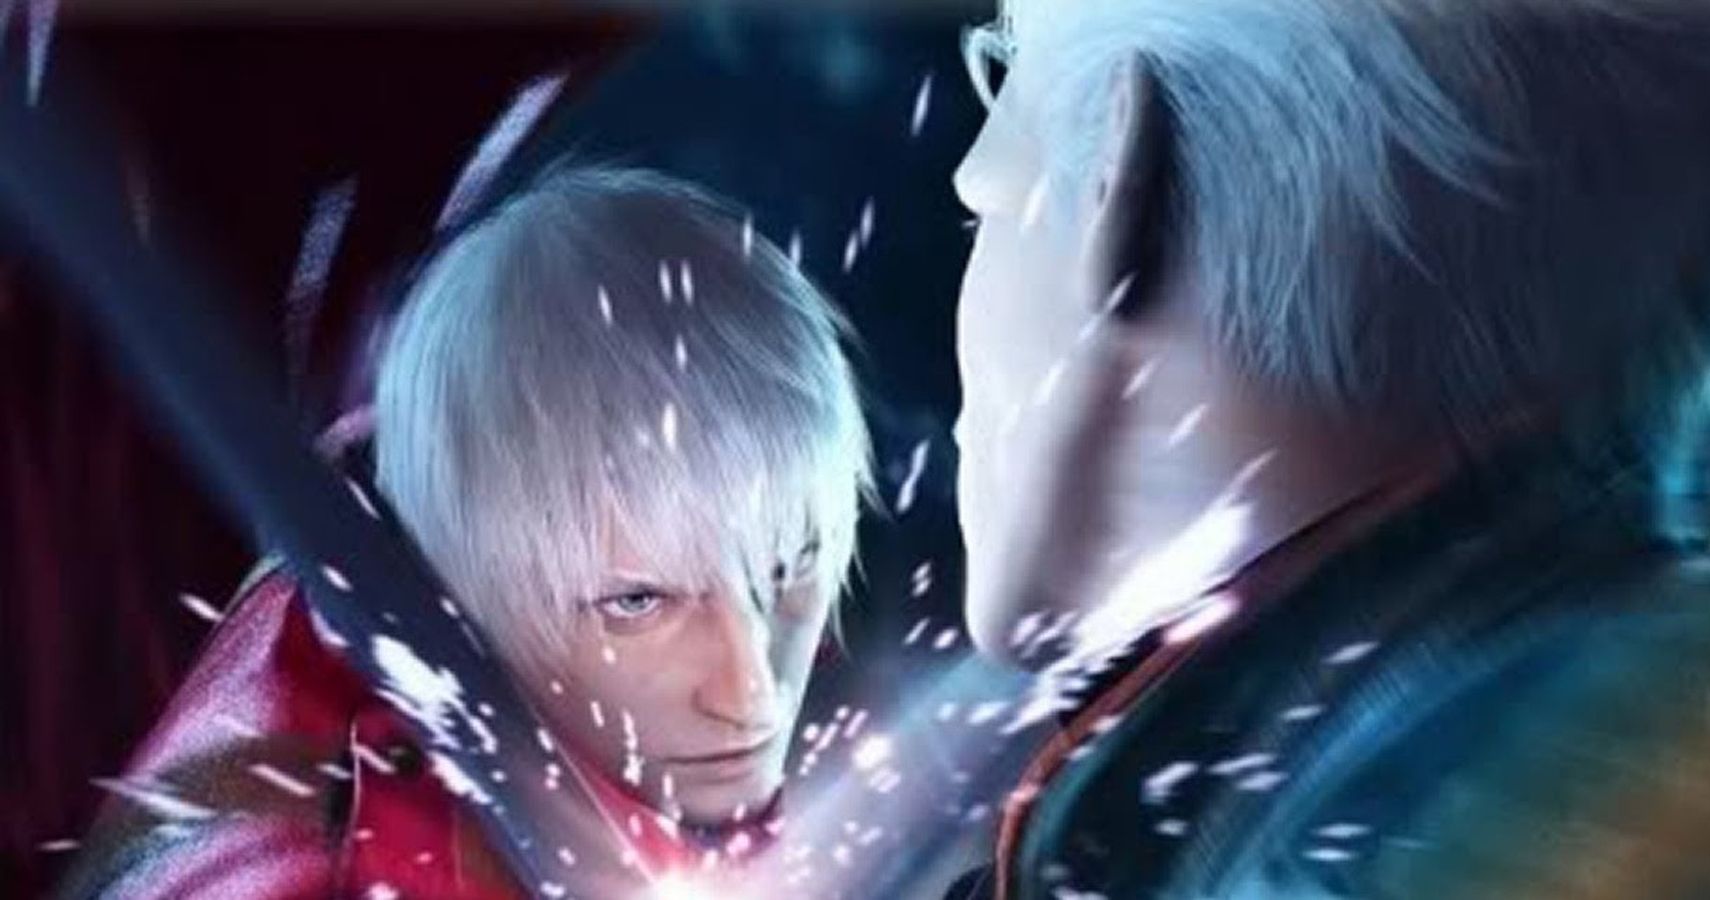 God Of War's Kratos Vs Devil May Cry's Dante: Who Is Stronger?